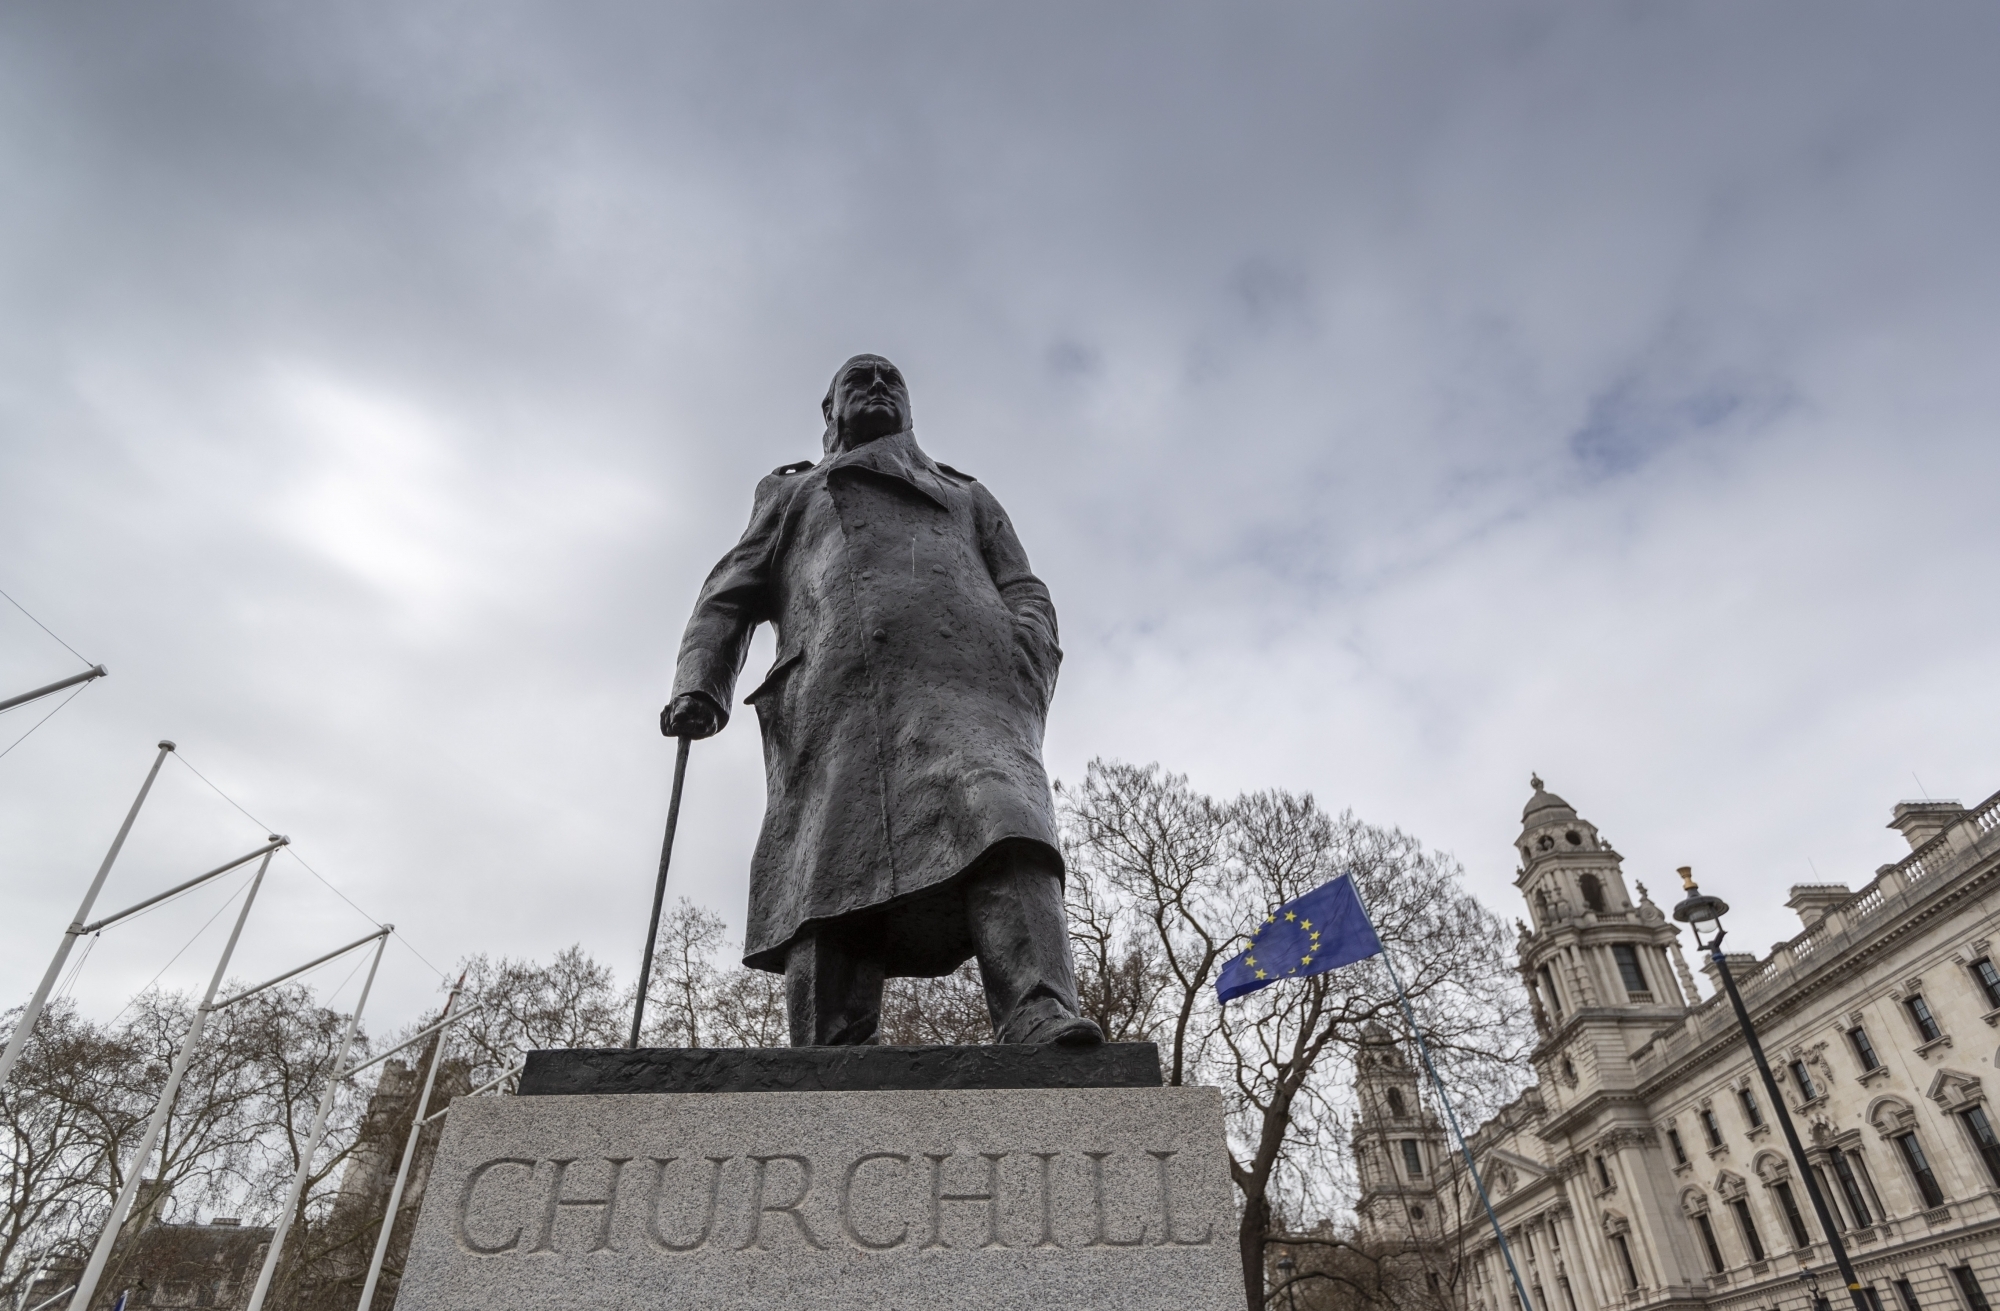 LONDON, March 23, 2019 (Xinhua) -- An EU flag and the statue of Winston Churchill are seen during the "Put it to the People" march in central London, Britain, on March 23, 2019. Hundreds of thousands of people on Saturday marched through central London calling for another referendum on Brexit as the country is caught by the Brexit impasse again. (Xinhua/Han Yan/IANS) by . 